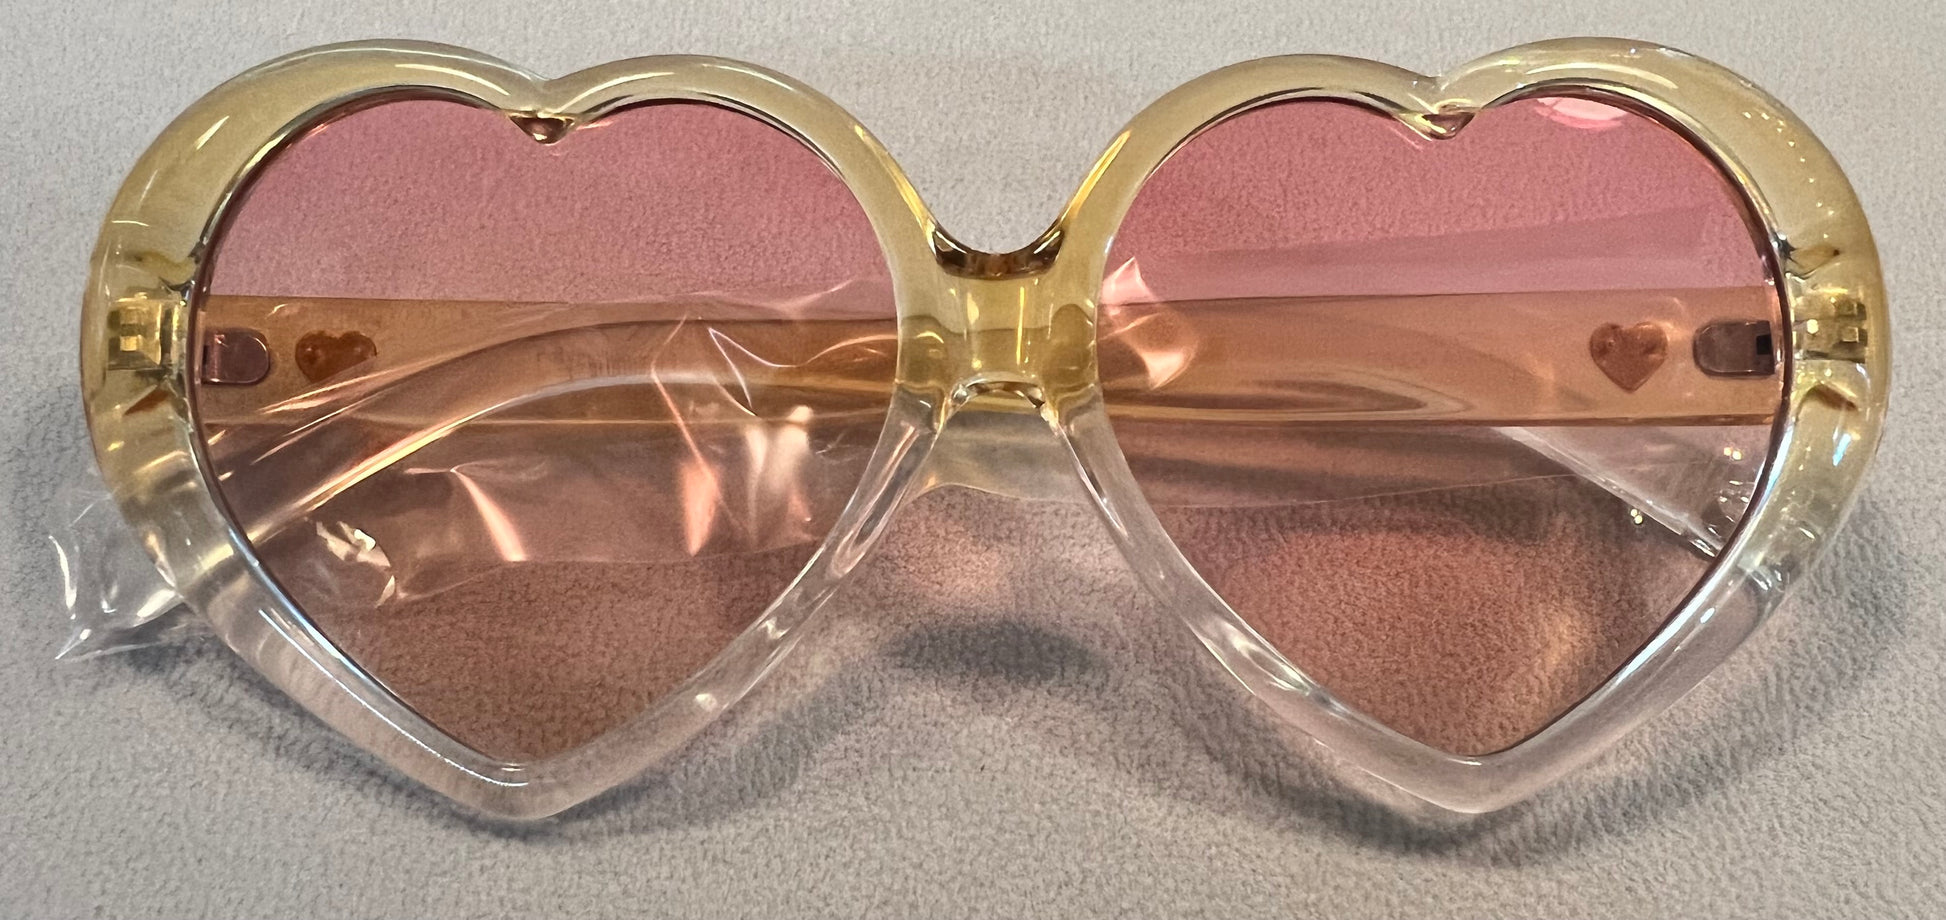 Lovely Heart Shaped Frame Sunglasses-Apparel & Accessories > Clothing Accessories > Sunglasses-Quinn's Mercantile